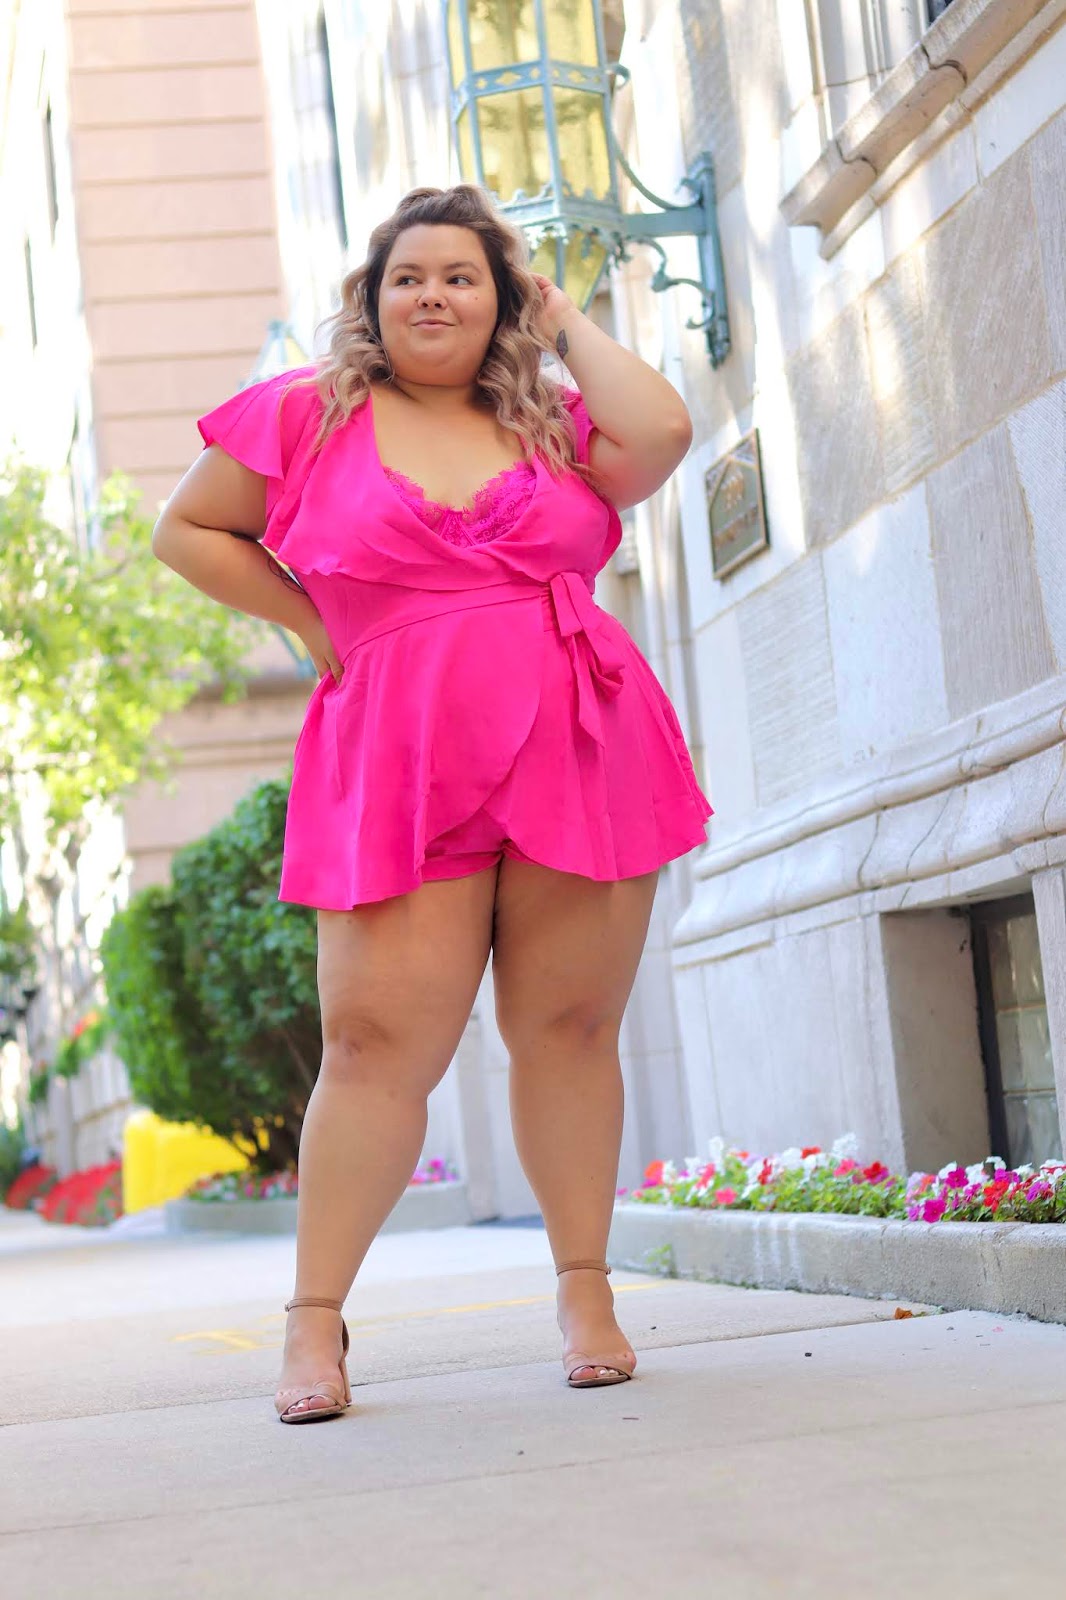 Chicago Plus Size Petite Fashion Blogger Natalie in the City wears a pink plus size romper.